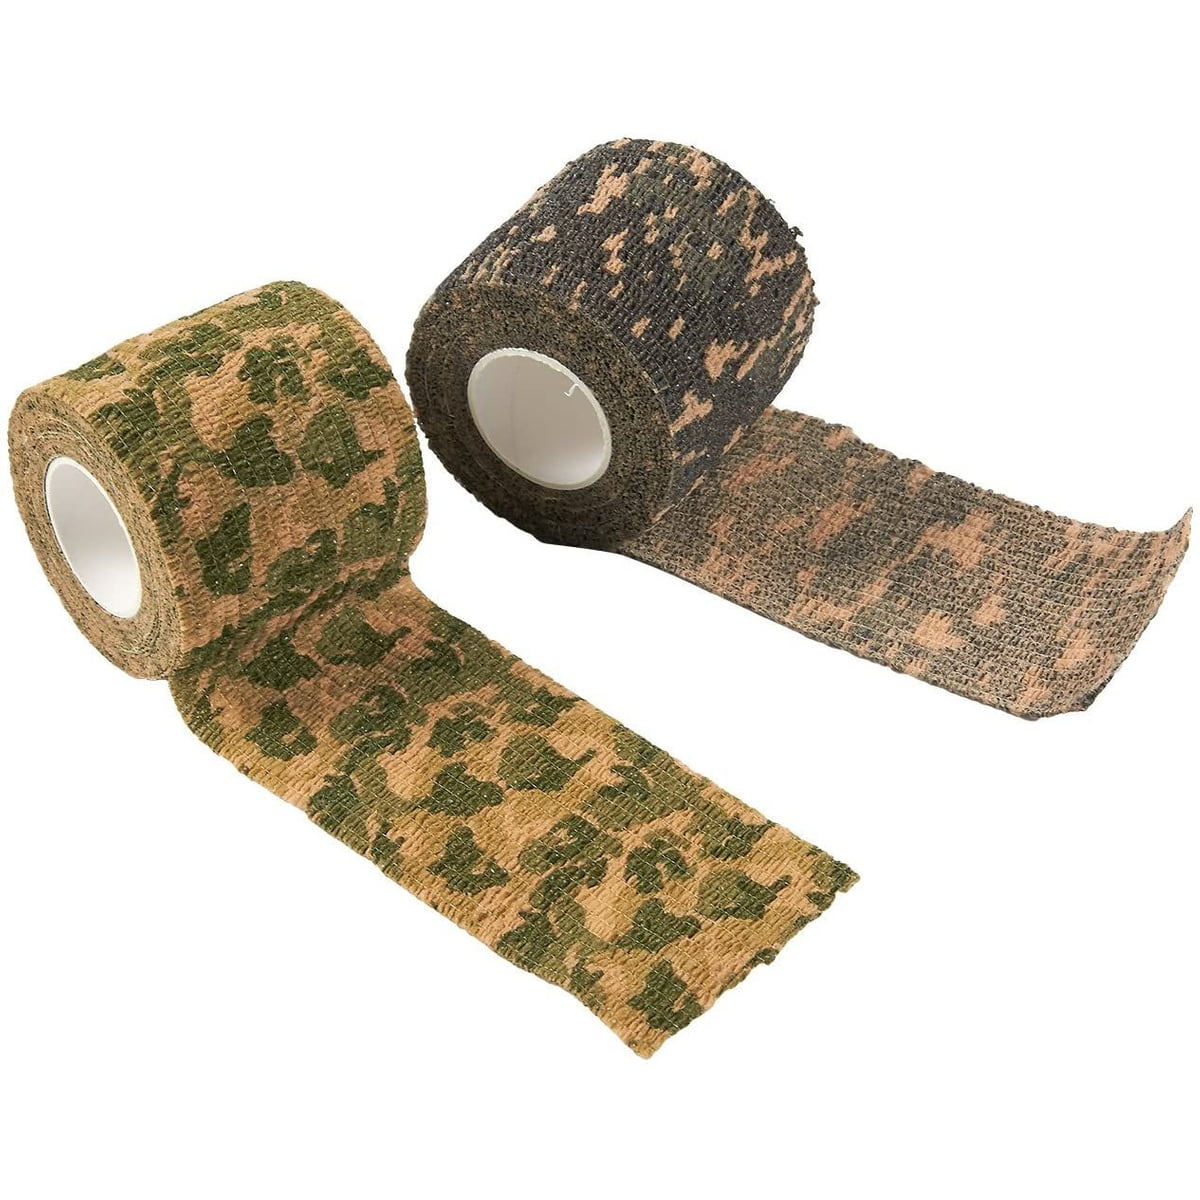 Flashlight Outdoor Photography. Hunting Yoo & Main 12 Roll Camouflage Tape Self Adherent Cohesive Bandage Wrap Rifle Shotgun Camo Wrap Tape Military Camo Stretch Form Bandage for Camping Bicycle 